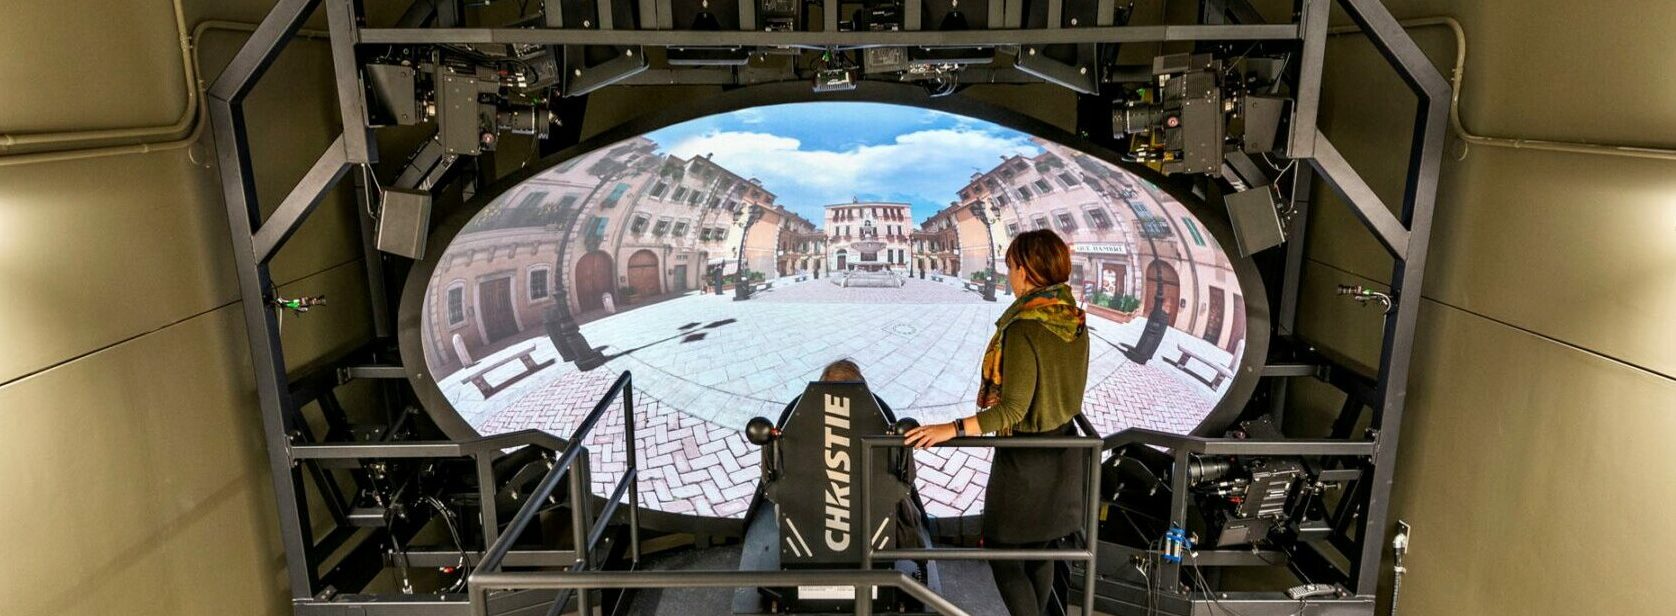 Two people watch a projection of a city on a digital dome.